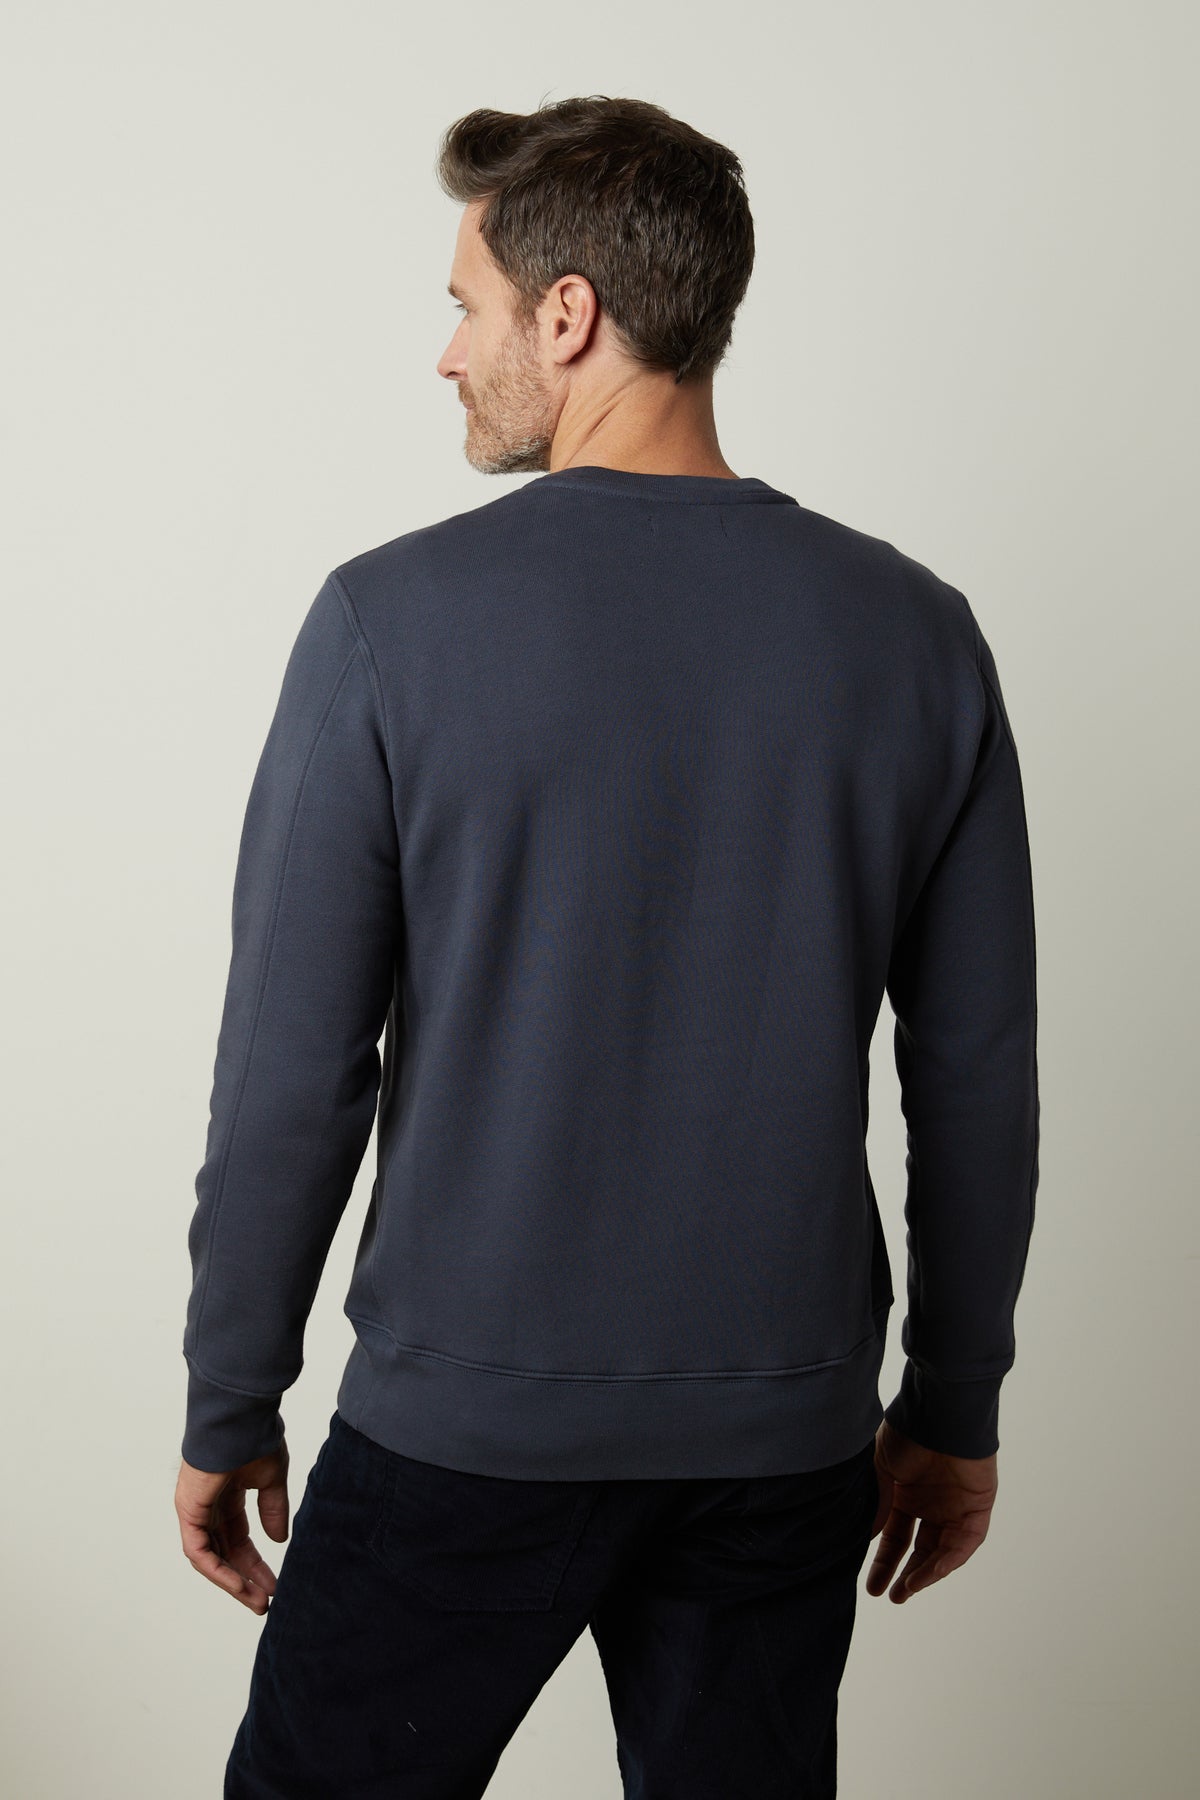   The back view of a man wearing a Velvet by Graham & Spencer KING CREW NECK SWEATSHIRT. 